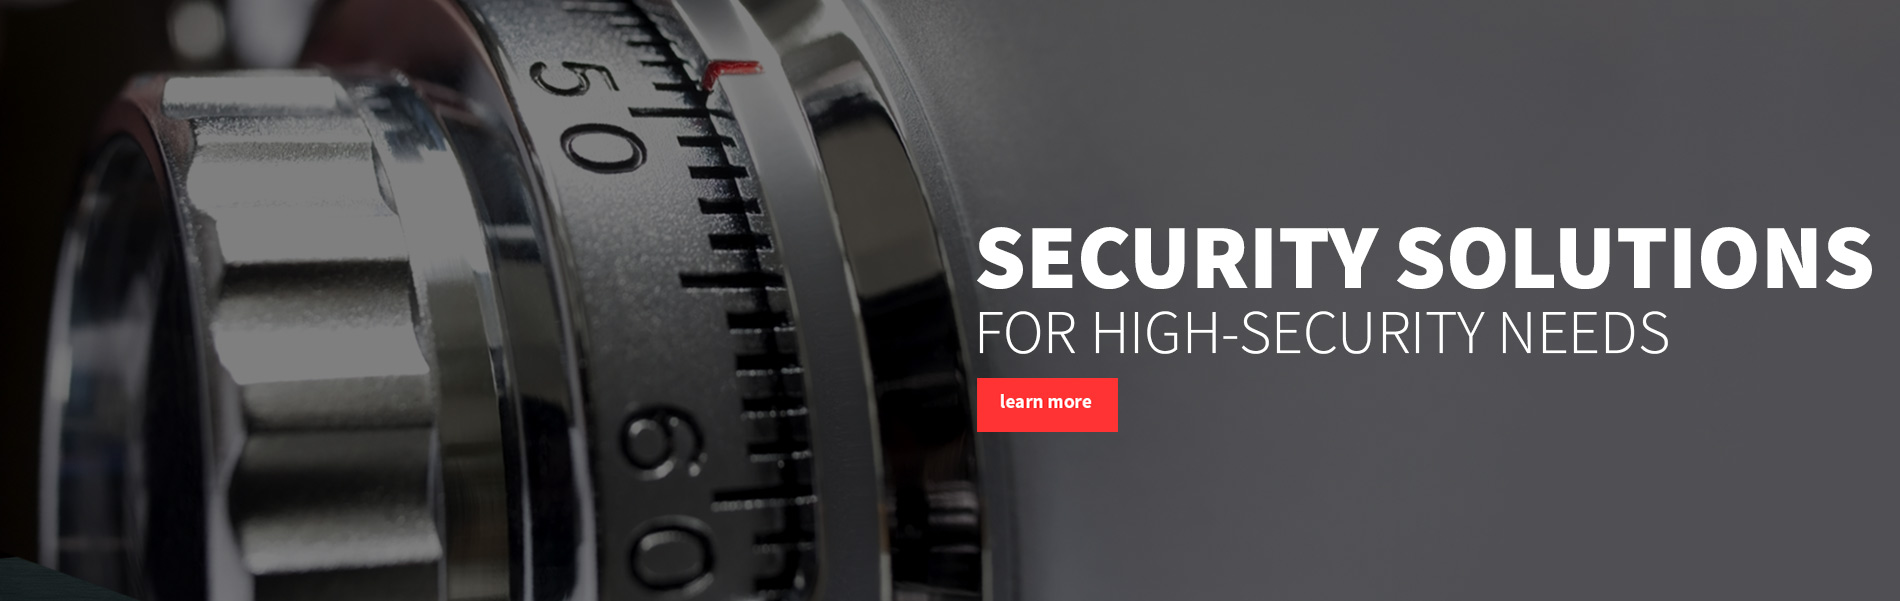 Security Solutions for High-Security needs